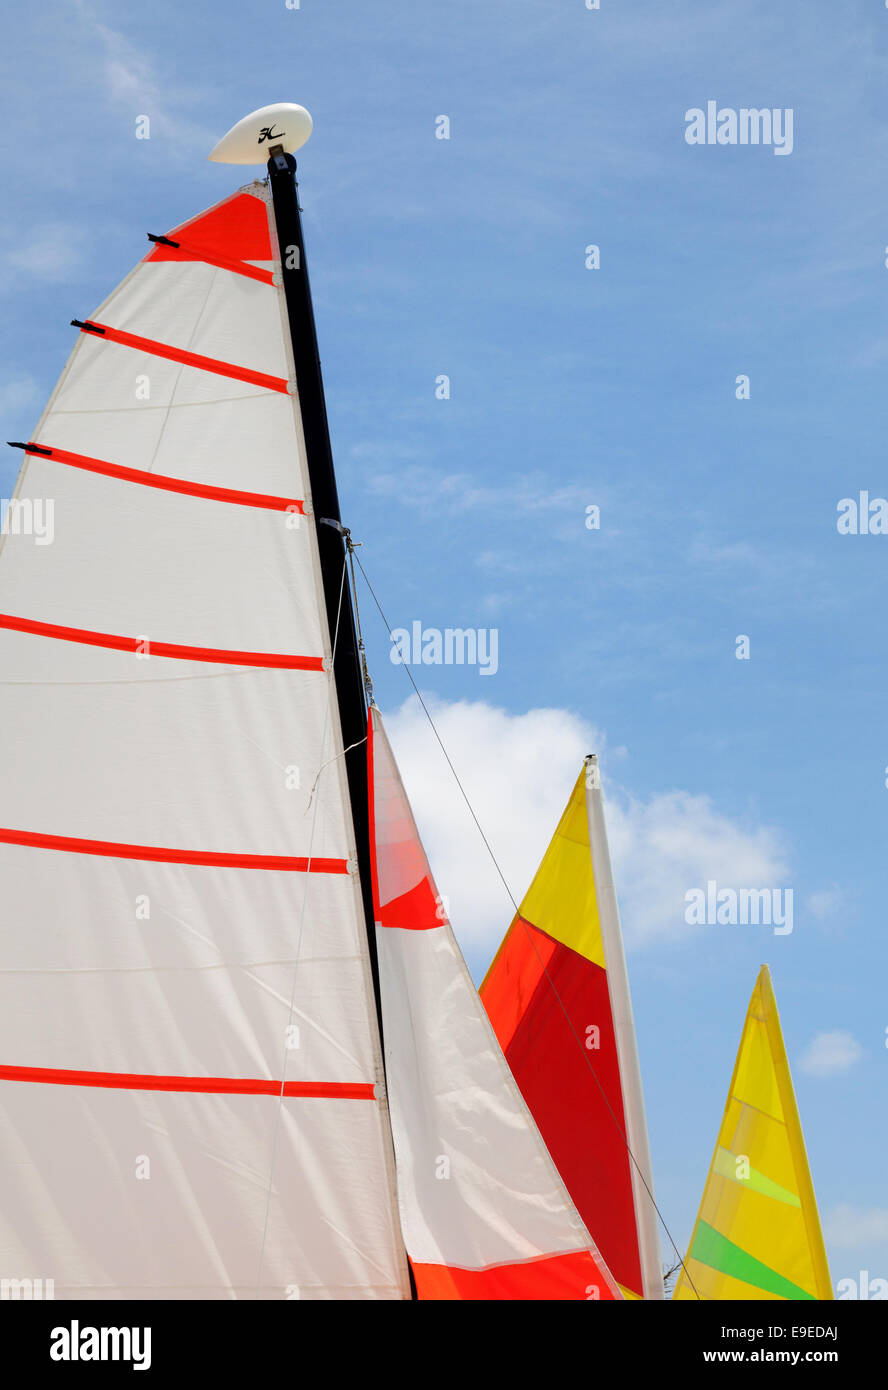 Colourful colorful sails against a blue sky, Stock Photo